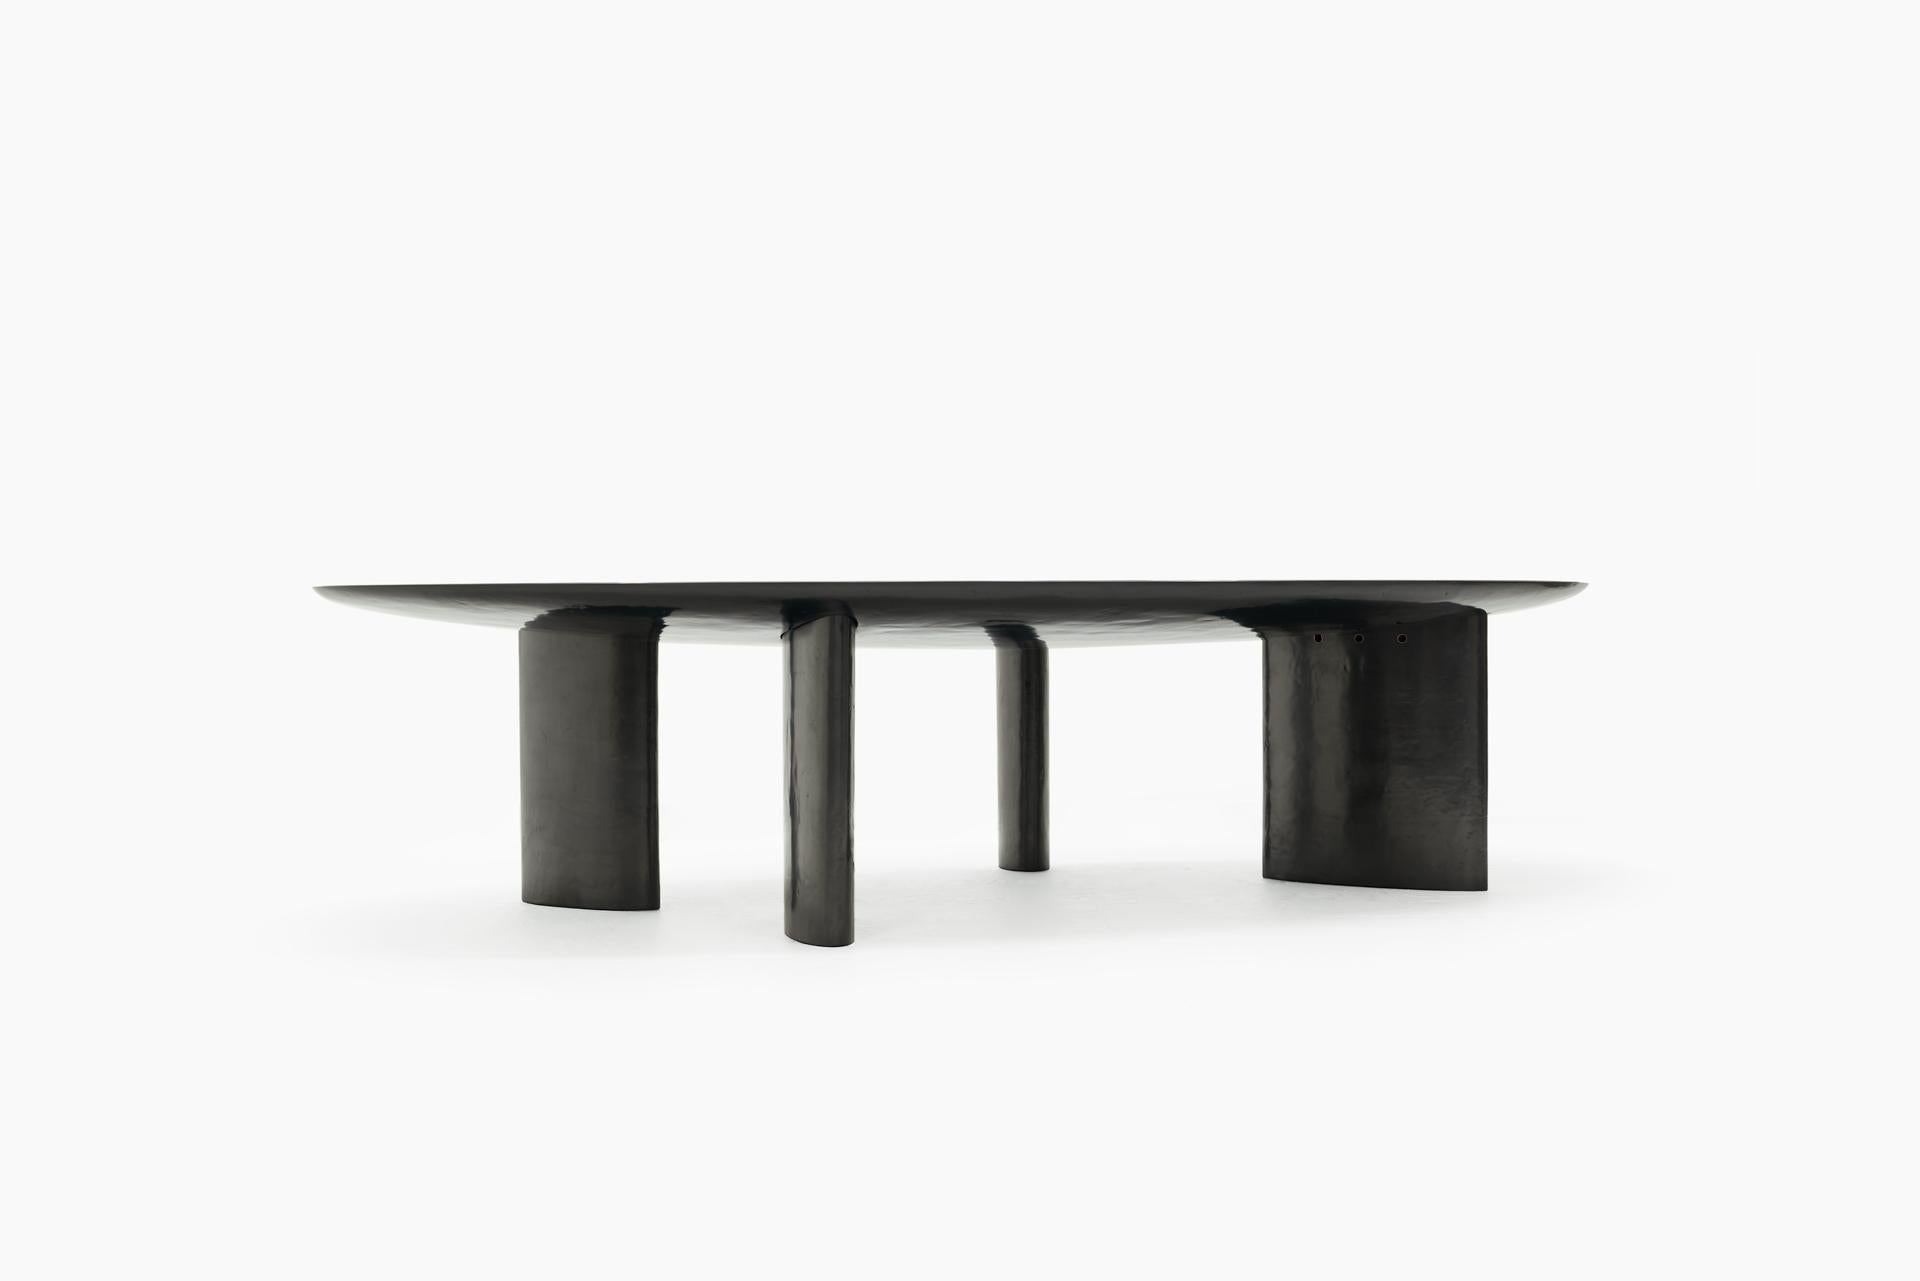 Uniq hand-applied graphite coating on the body and legs.
Hand-applied and polished layers of gun smoke and liquid aluminum on the top of the table.
Slight step on the outside edge of the top of the table.